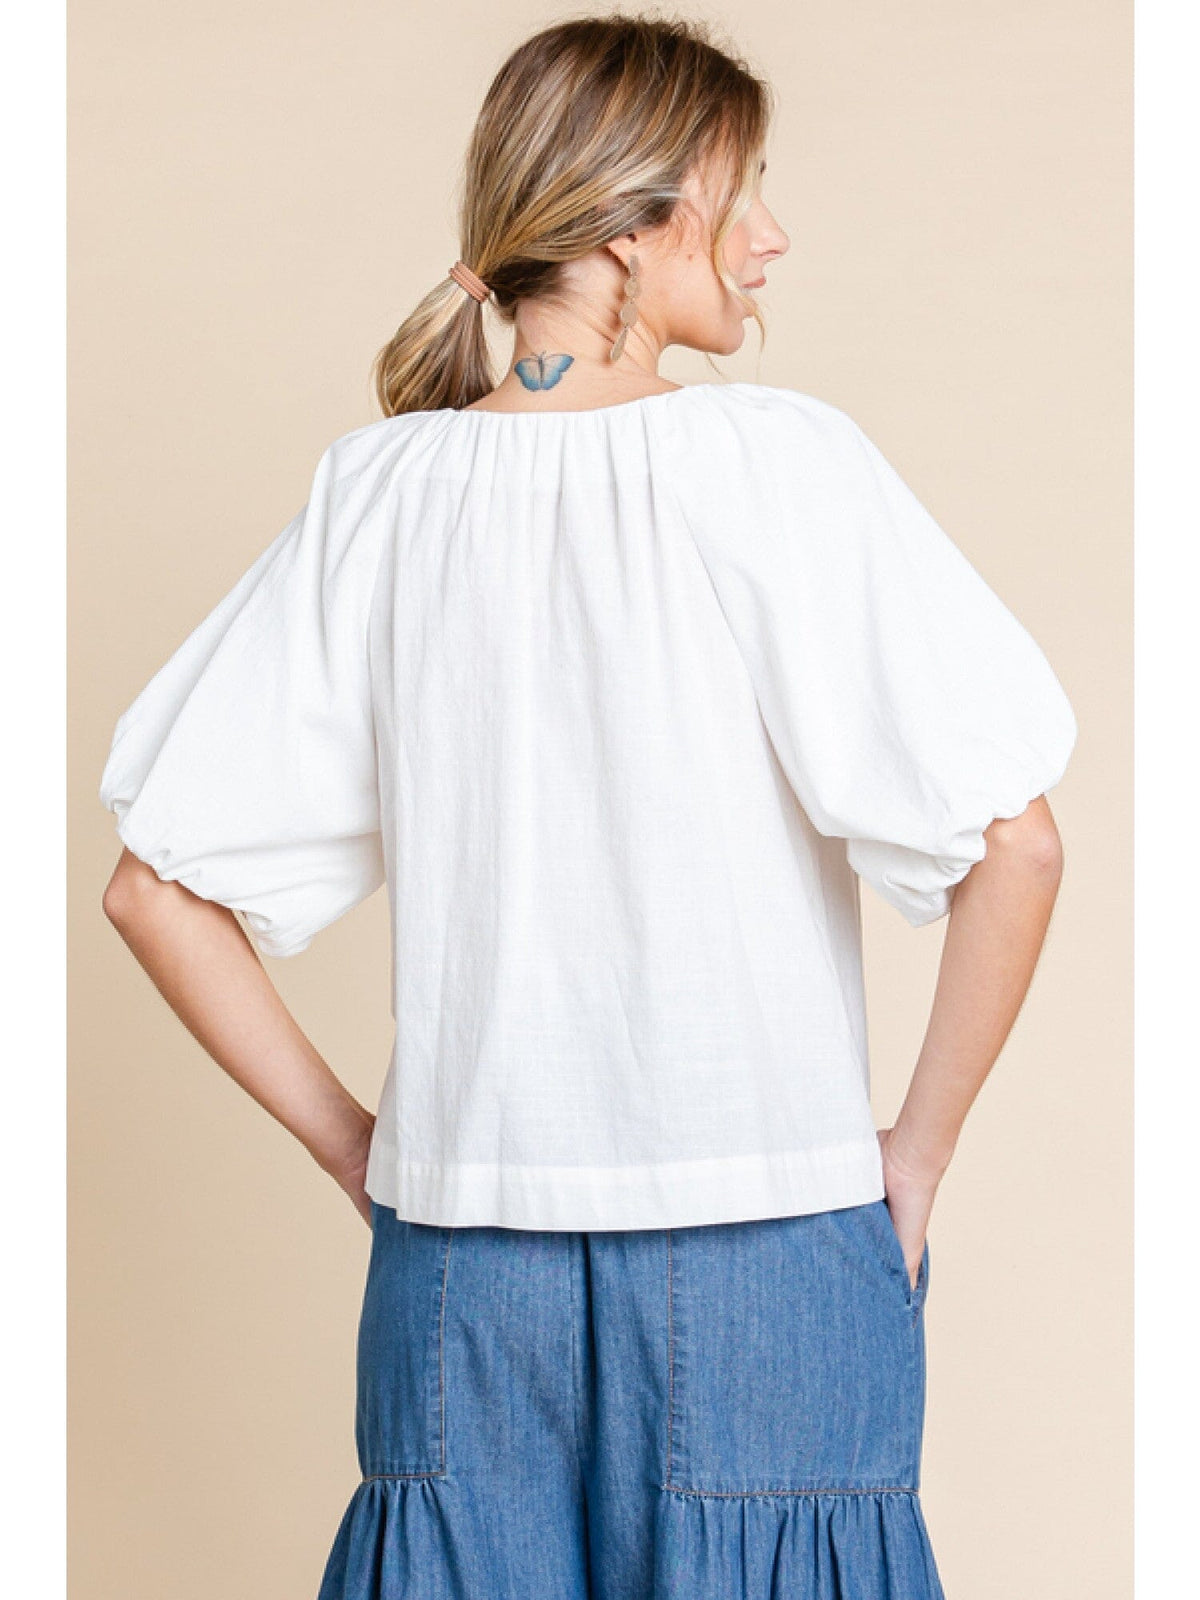 Already Over Off White Button Up Top - Caroline Hill